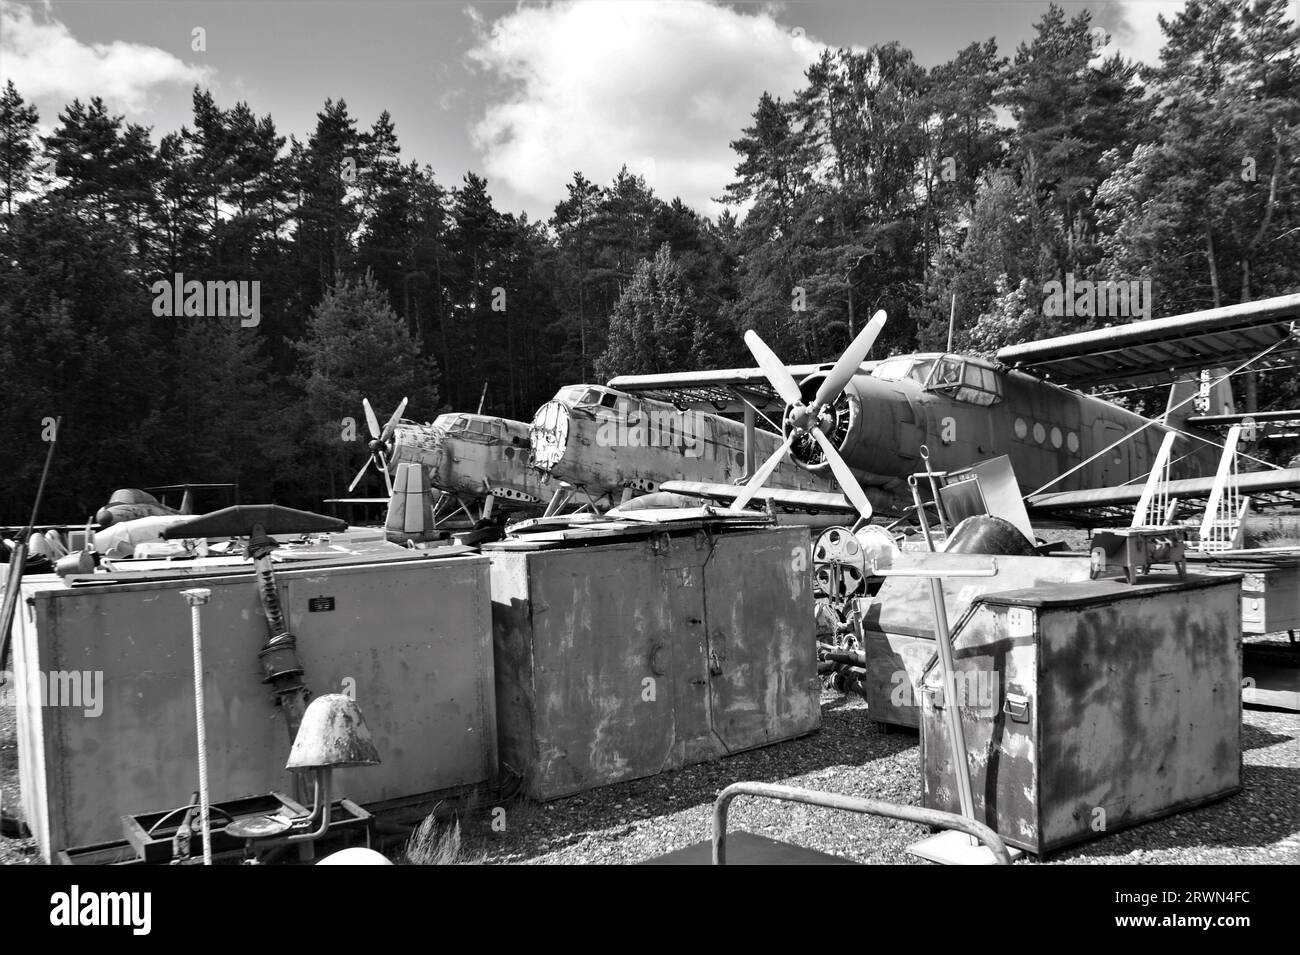 Old planes in the aviation museum. Black and white image. Stock Photo